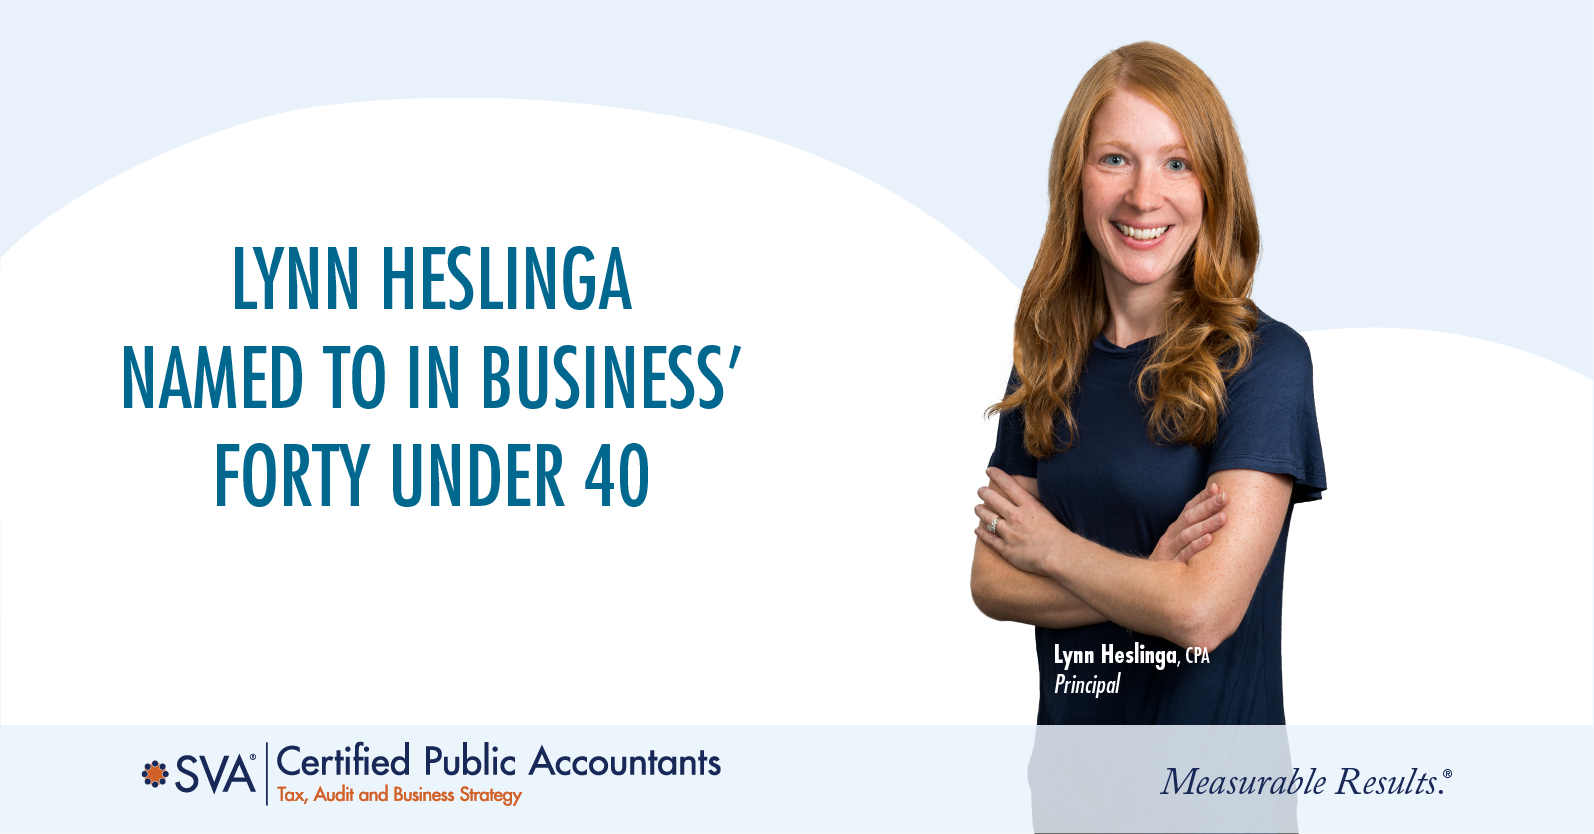 Lynn Heslinga Named to In Business’ Forty Under 40